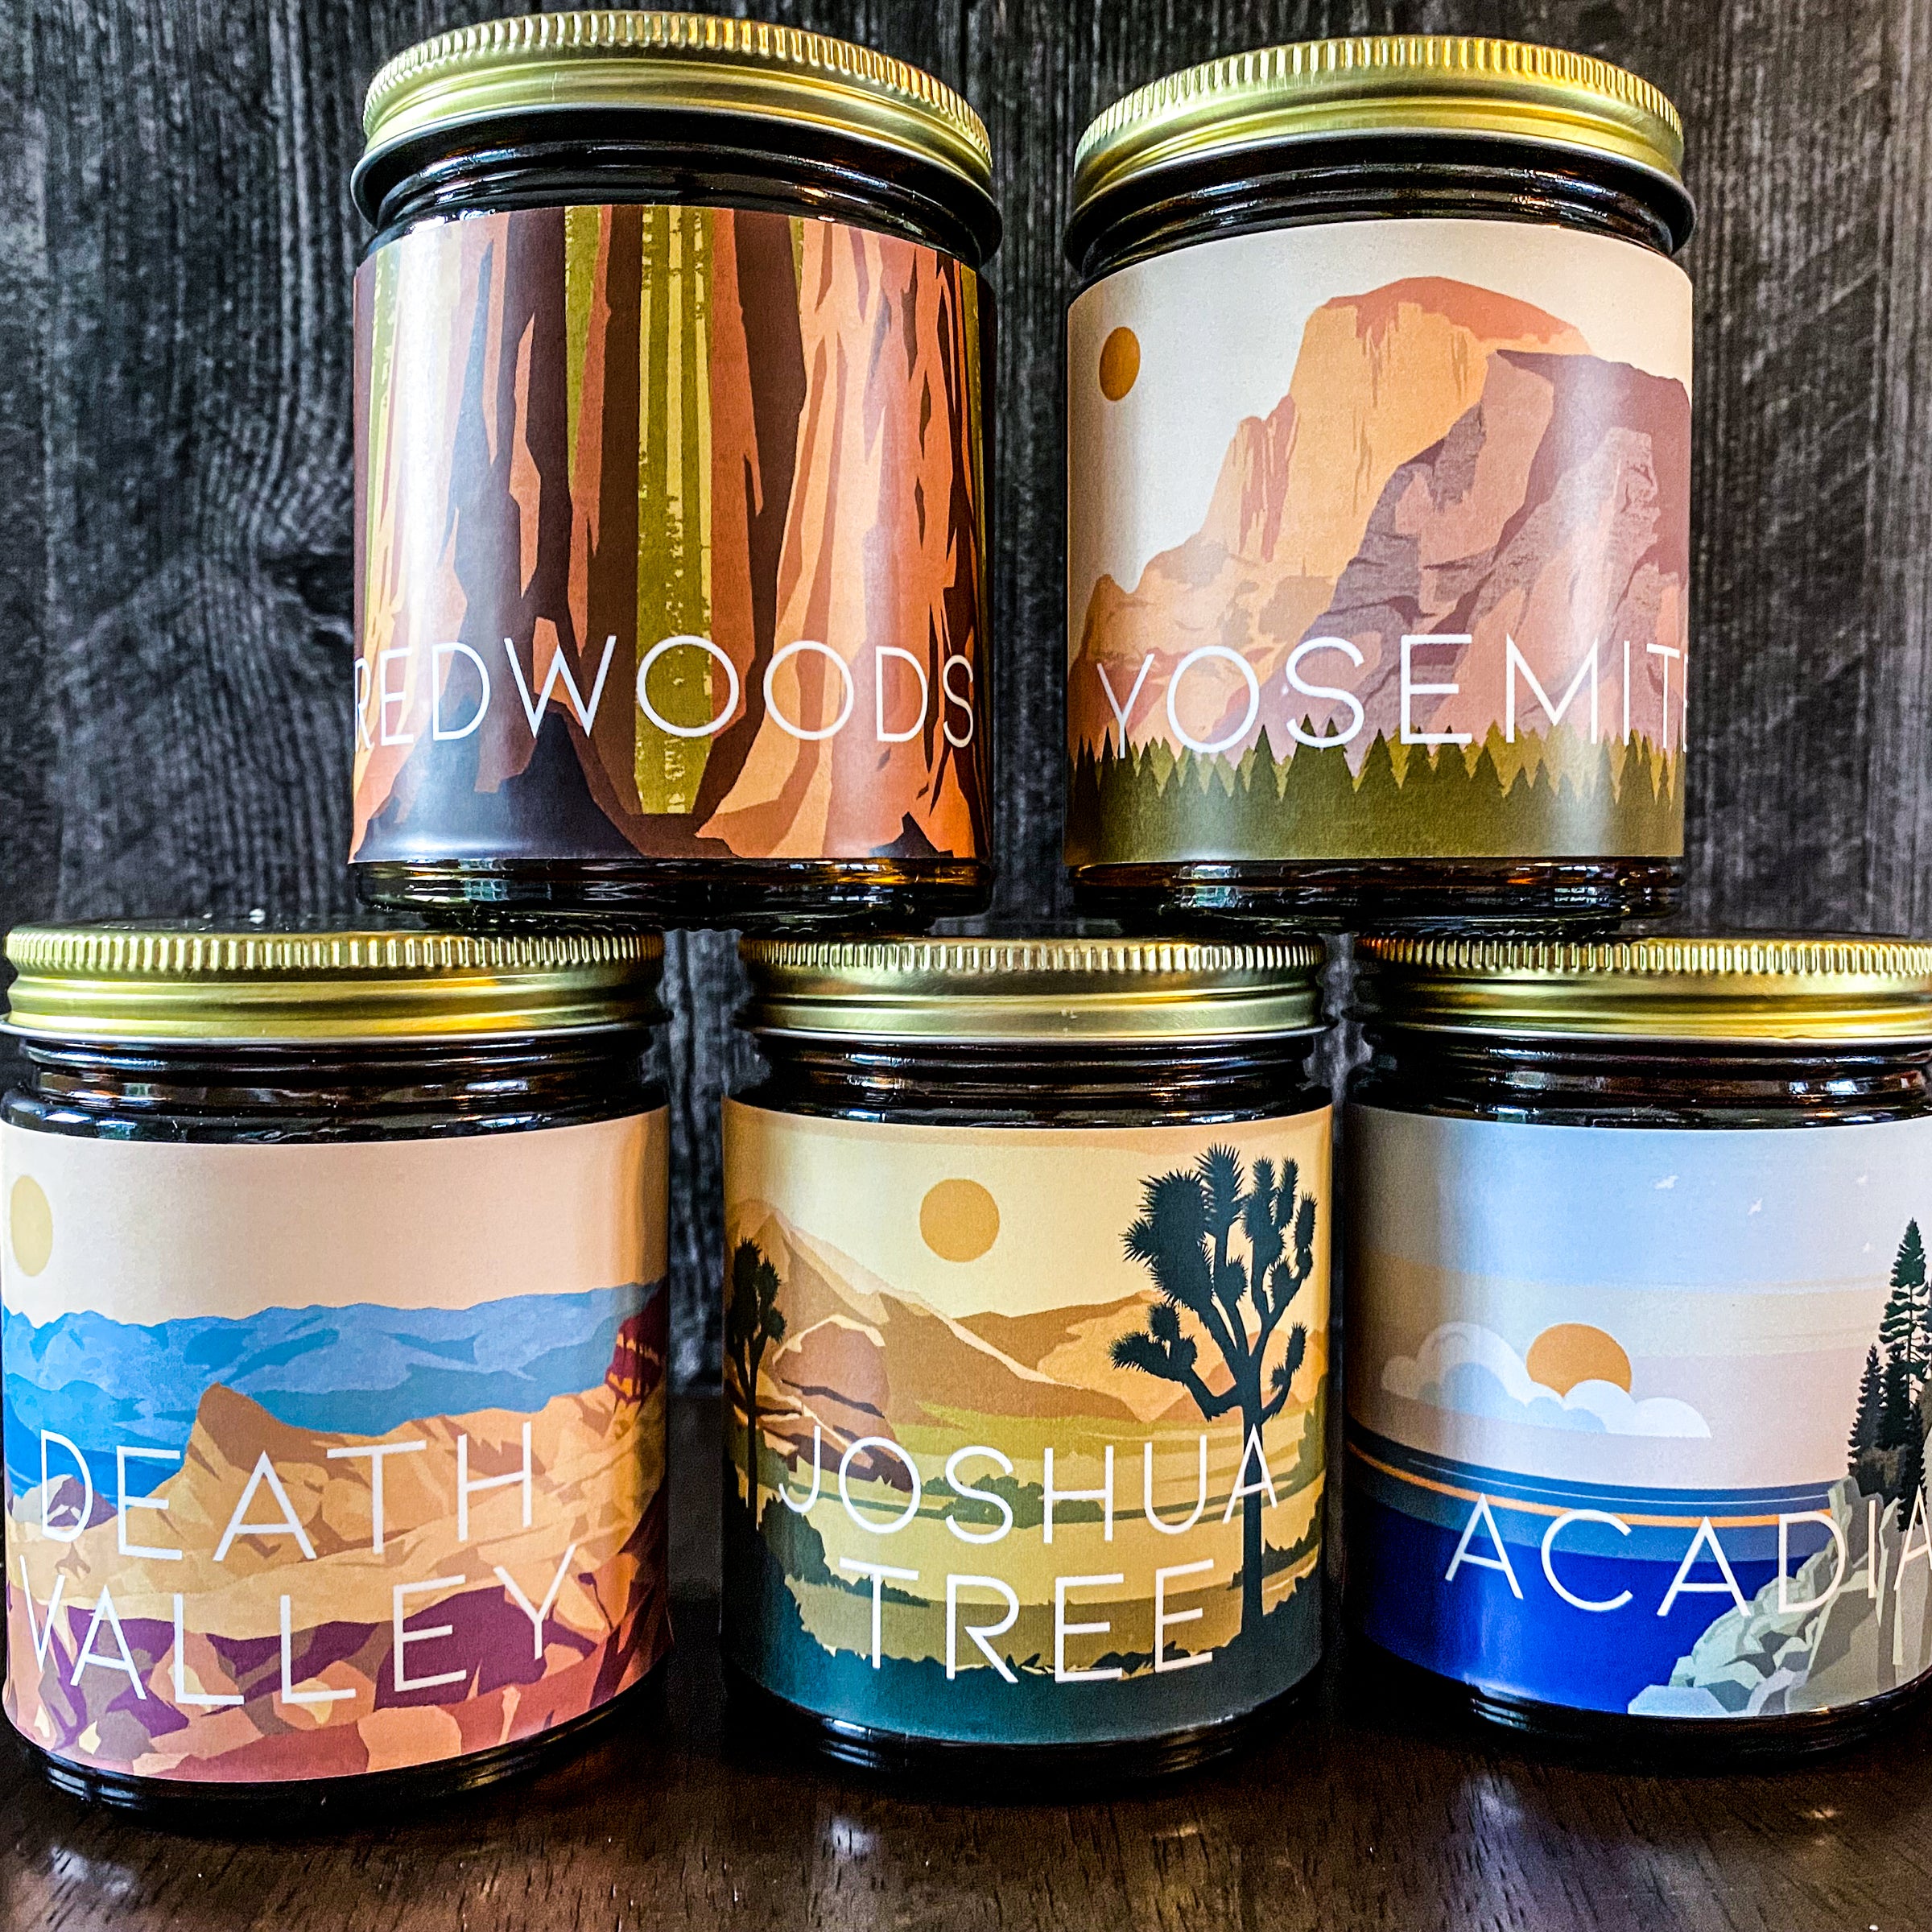 Redwoods Soy Candle – Queer Candle Co.